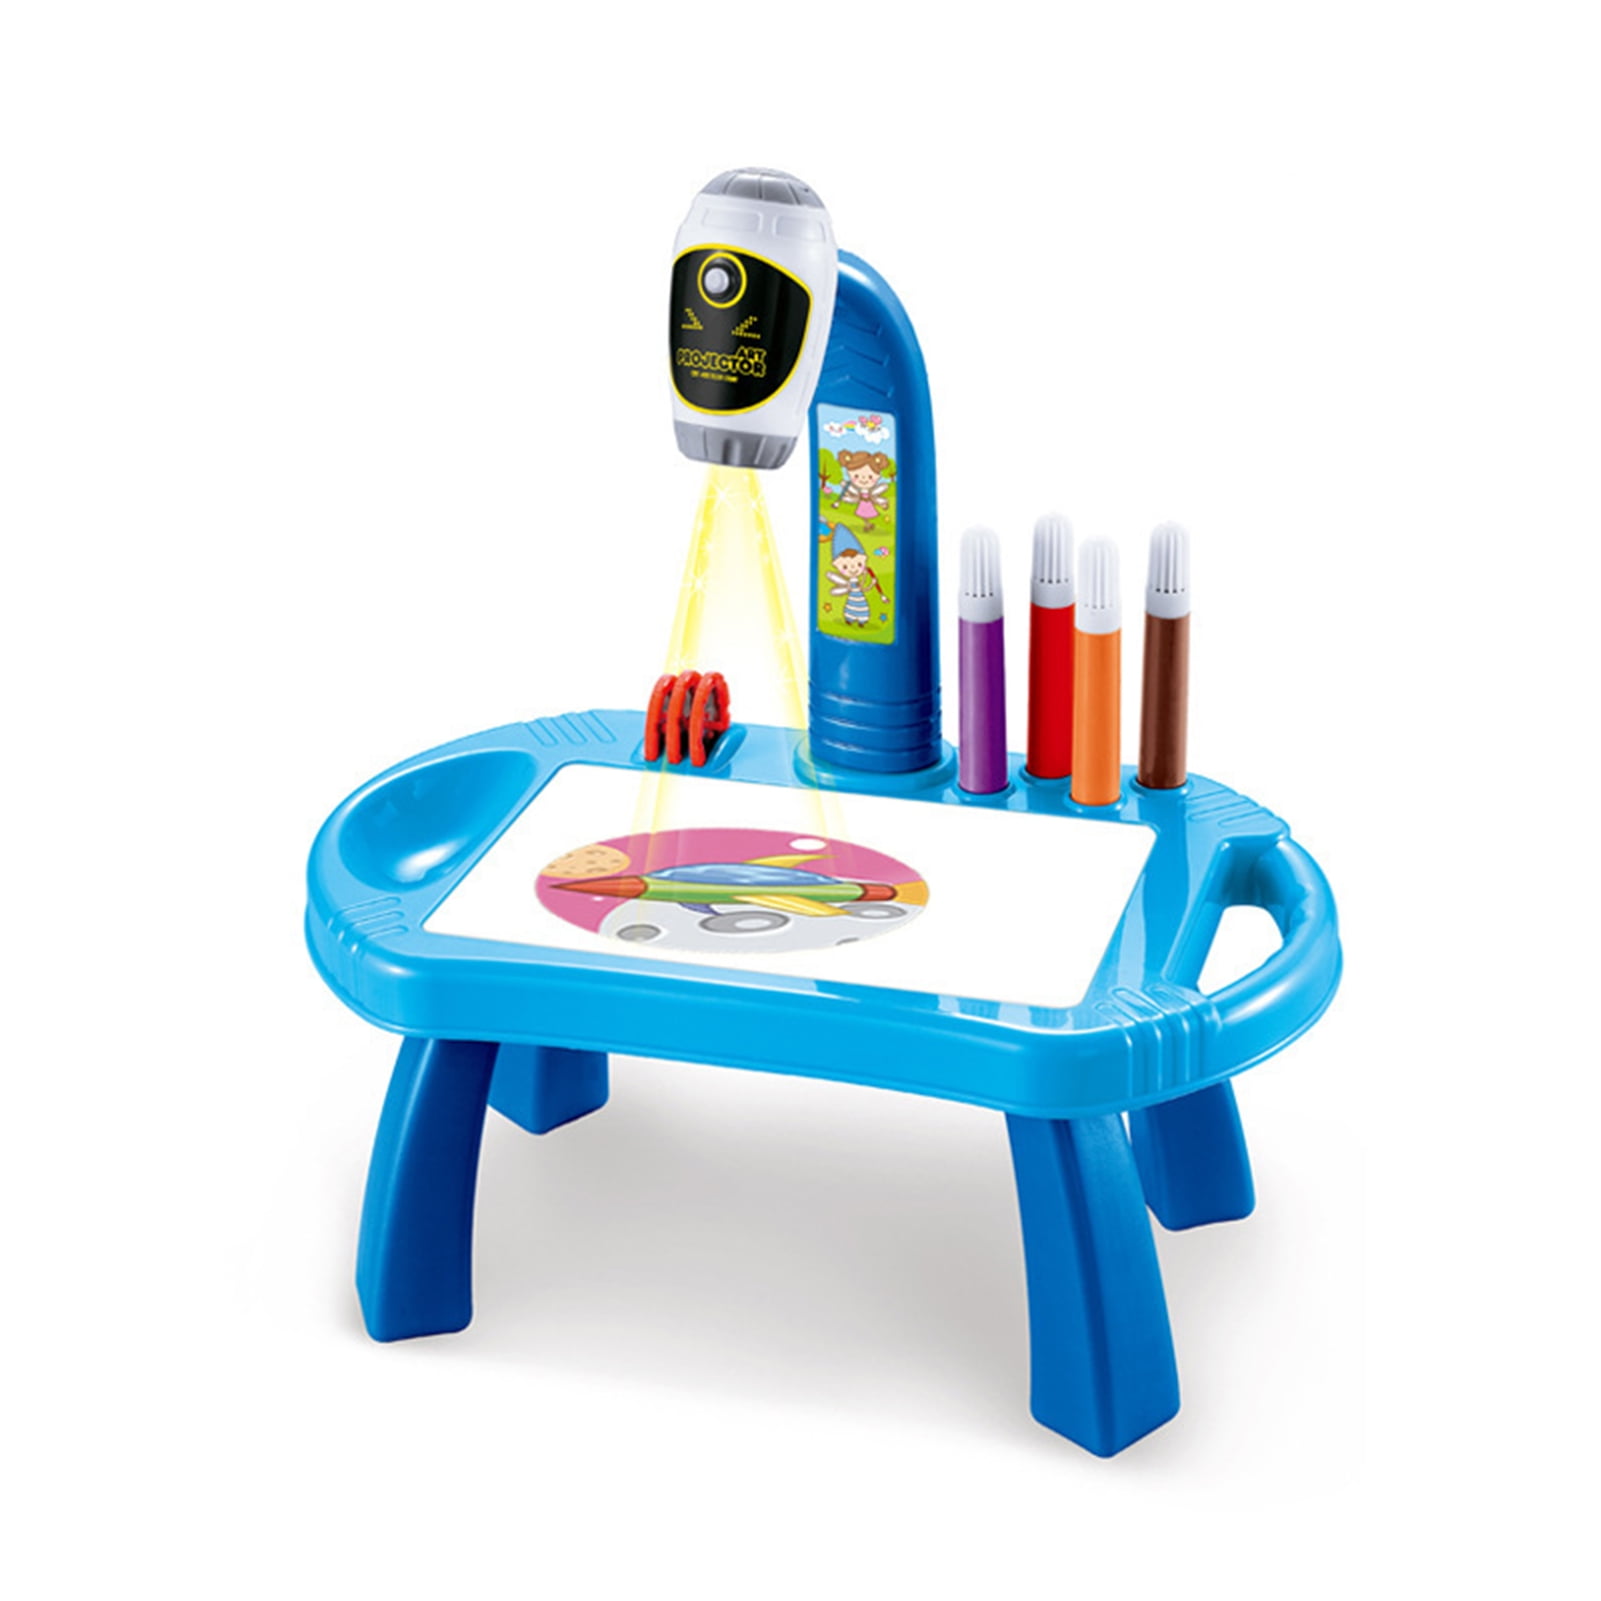 Children's Interactive Projector Drawing Desk – GoatyGoaty